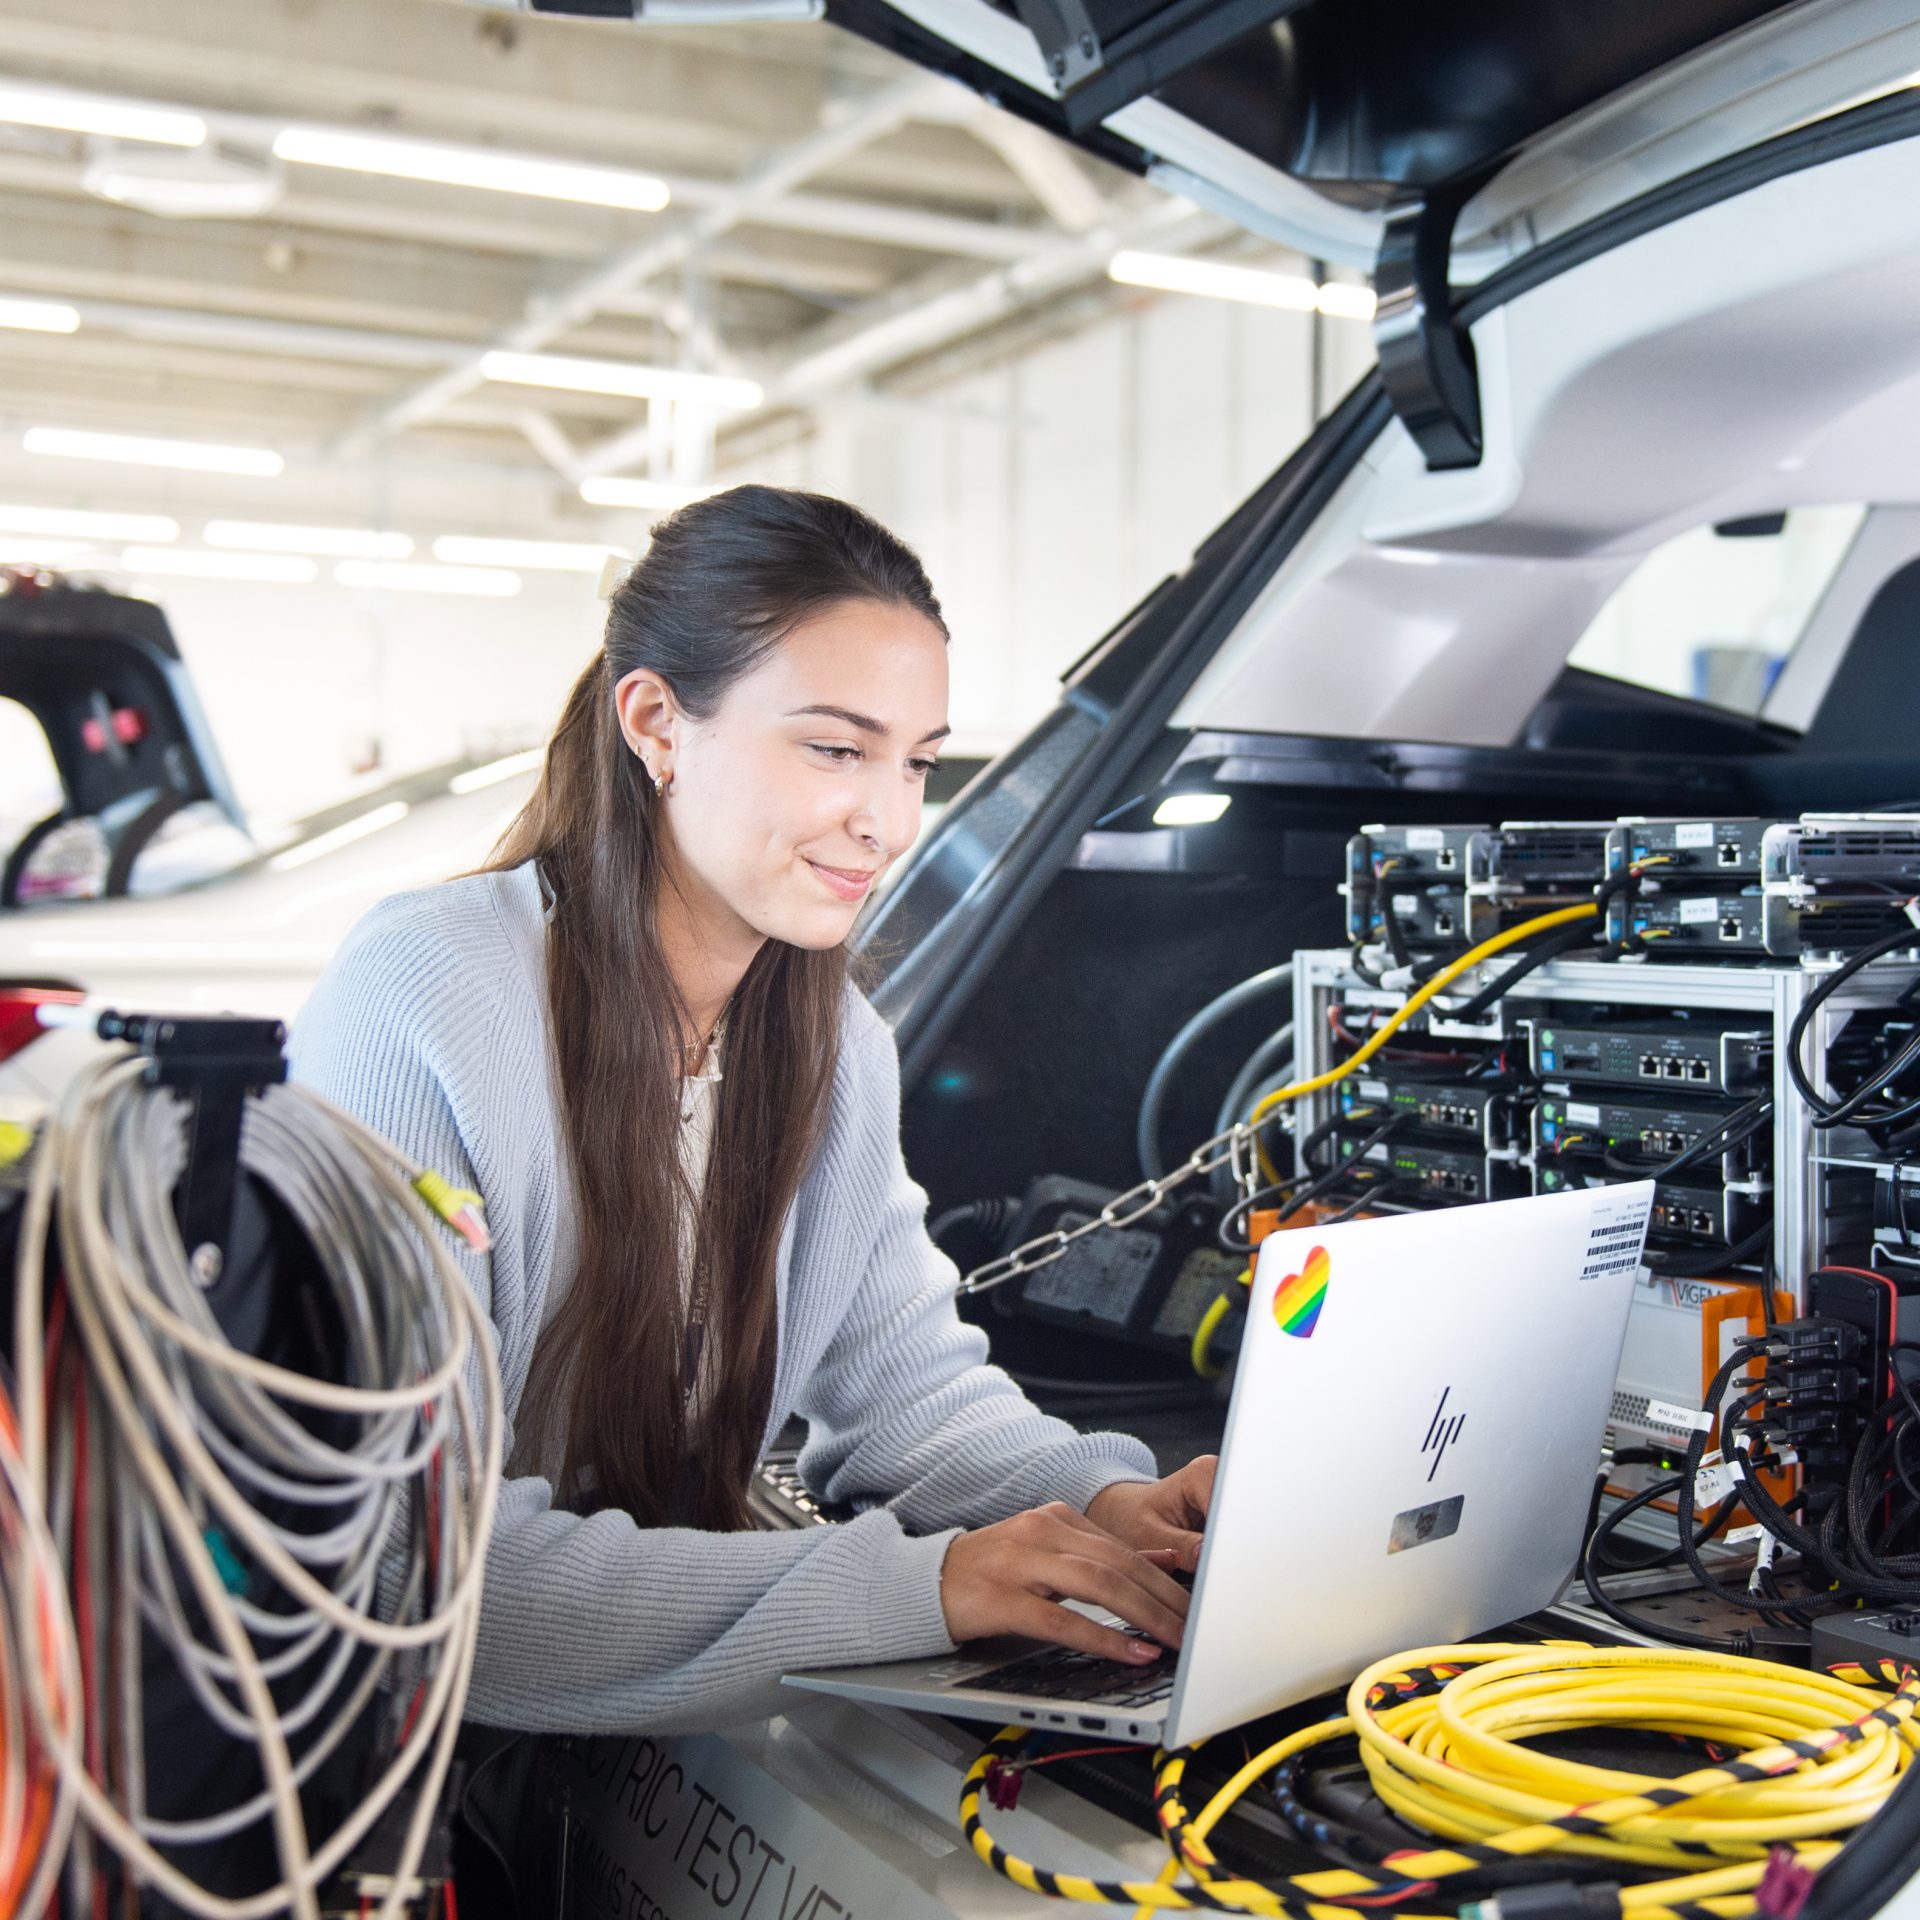 The picture shows an apprentice evaluating data on a vehicle.